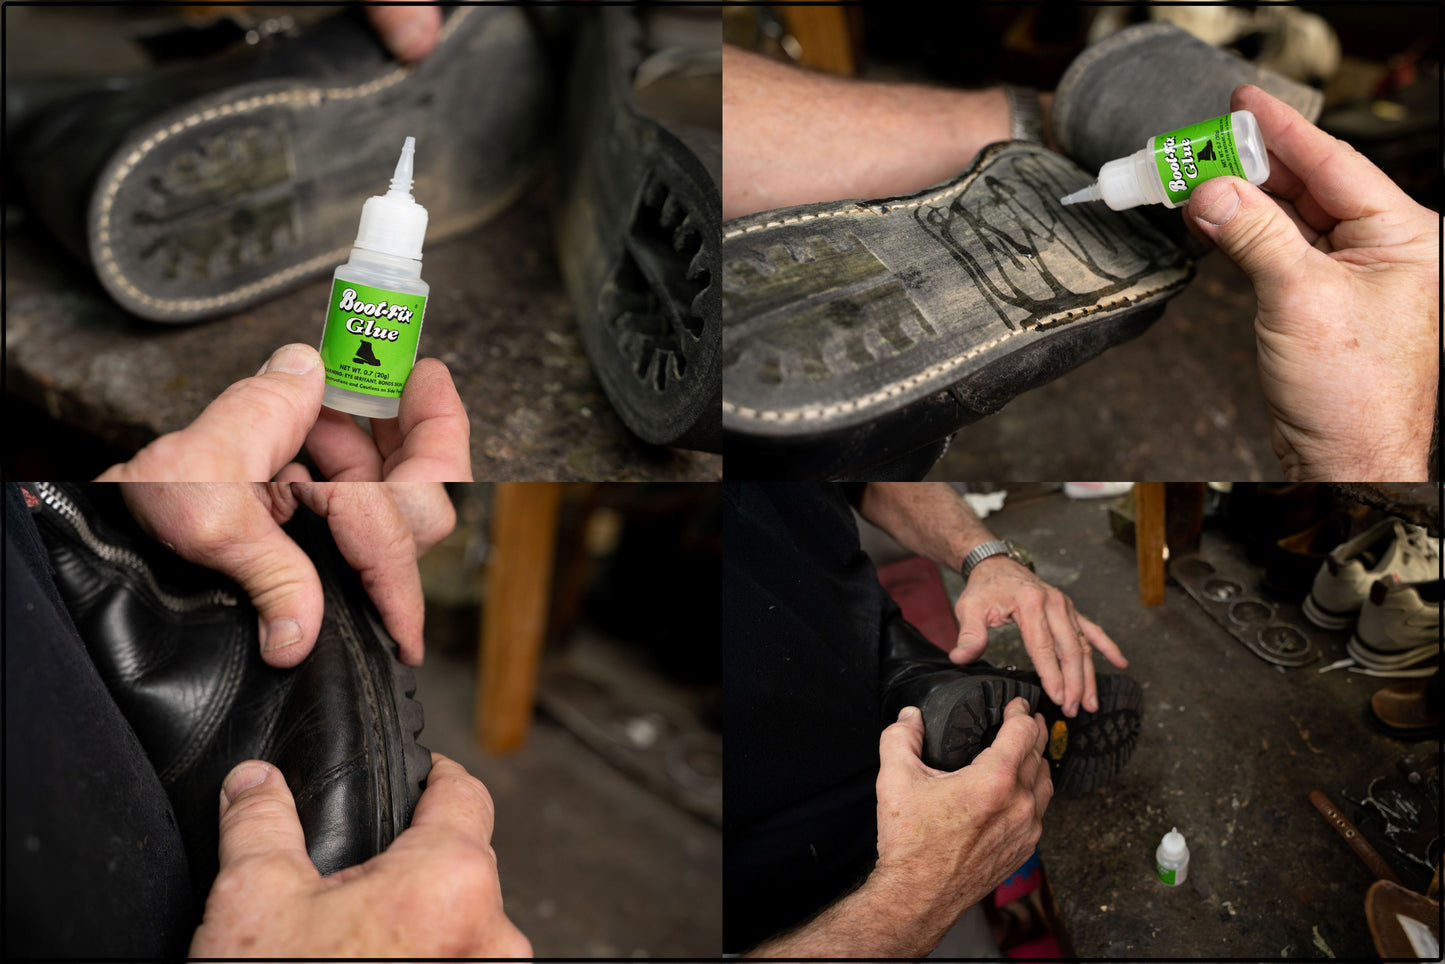 Boot-Fix Glue: Professional Grade Shoe Repair Glue for Boots, Shoes, and More